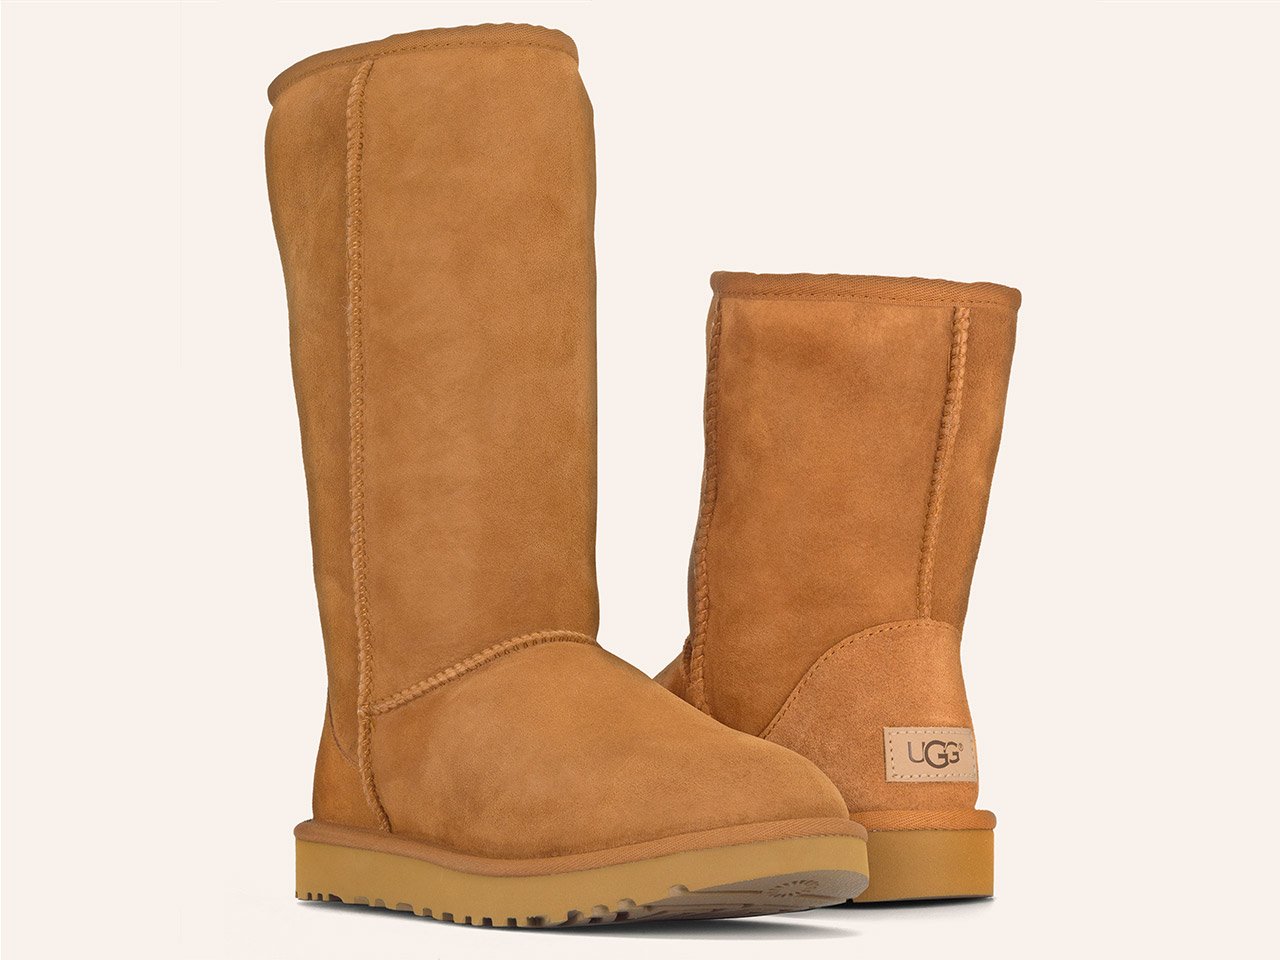 Do UGG Boots Run Big or Small?